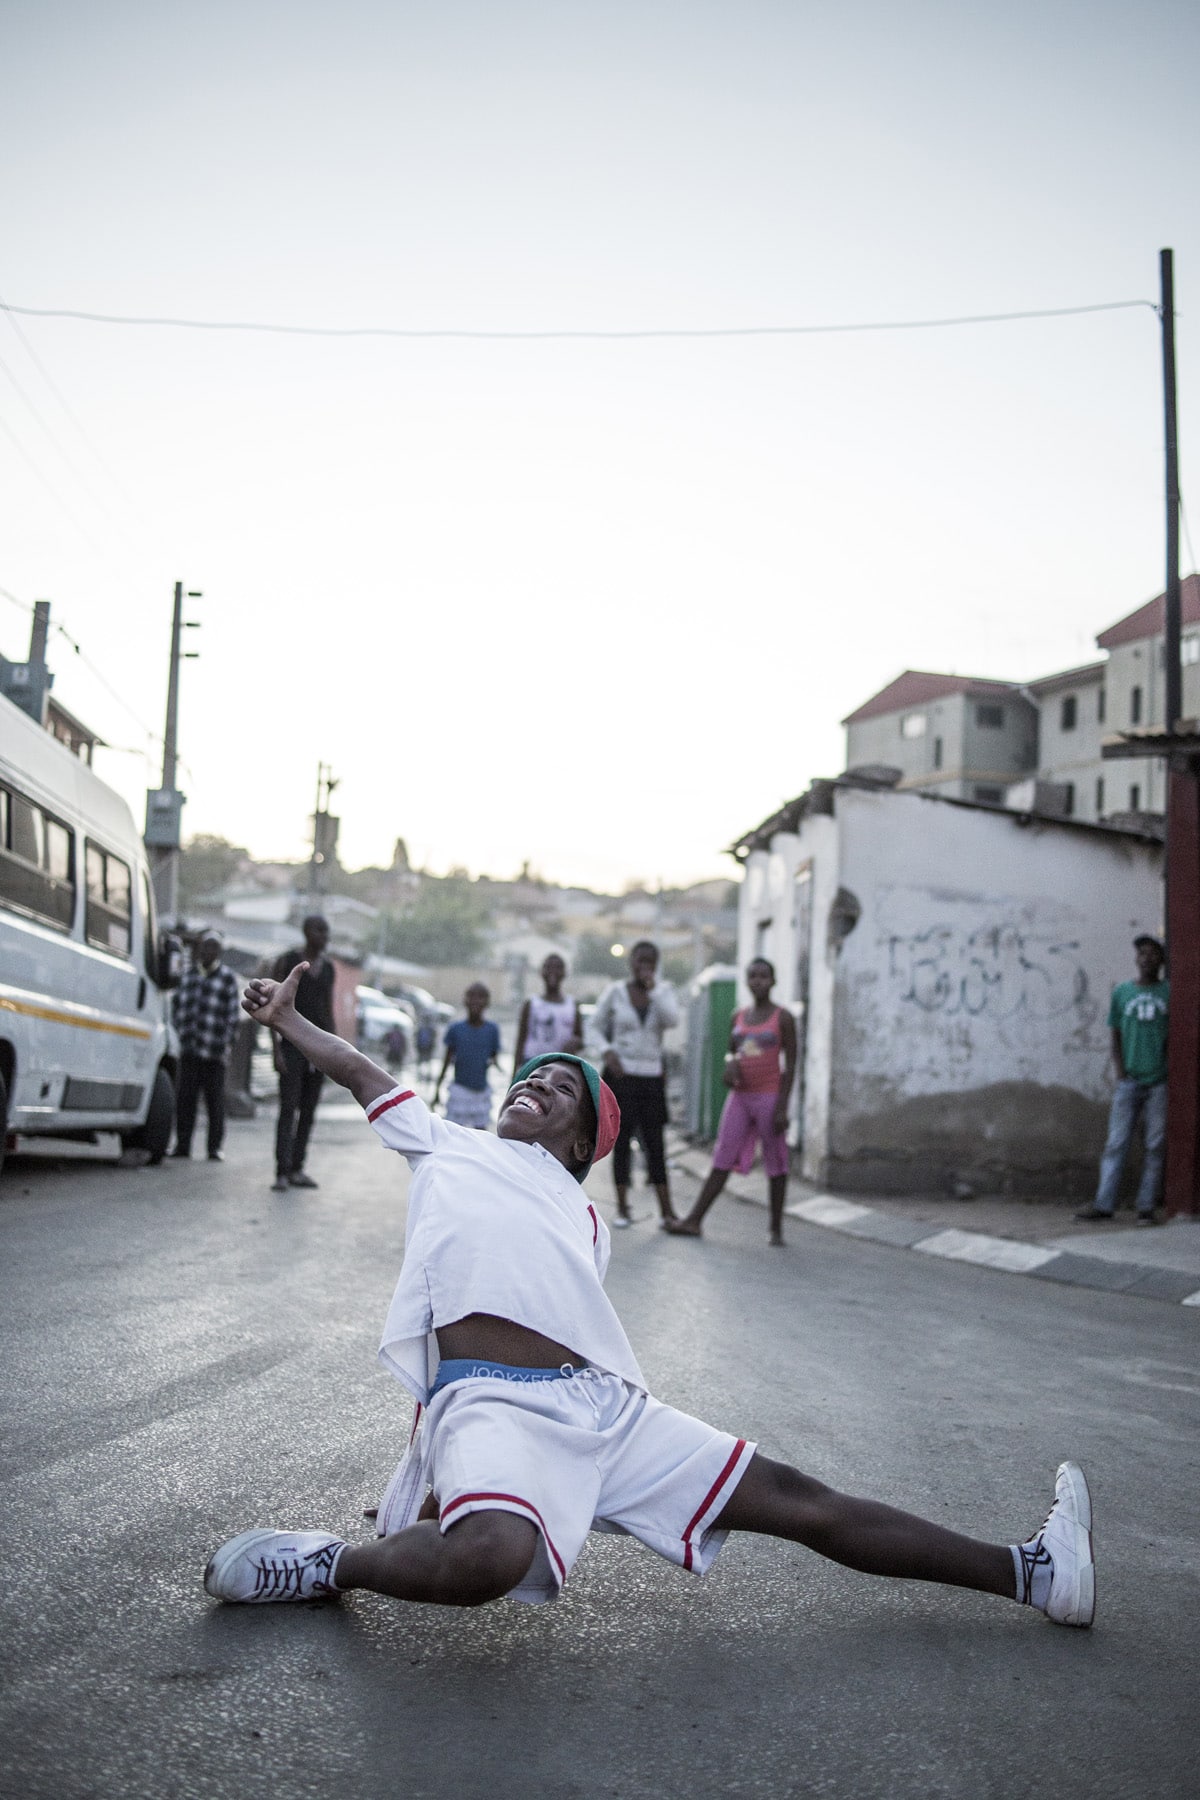 This Photographer Wants To Help Bring South African Dance Culture To The World